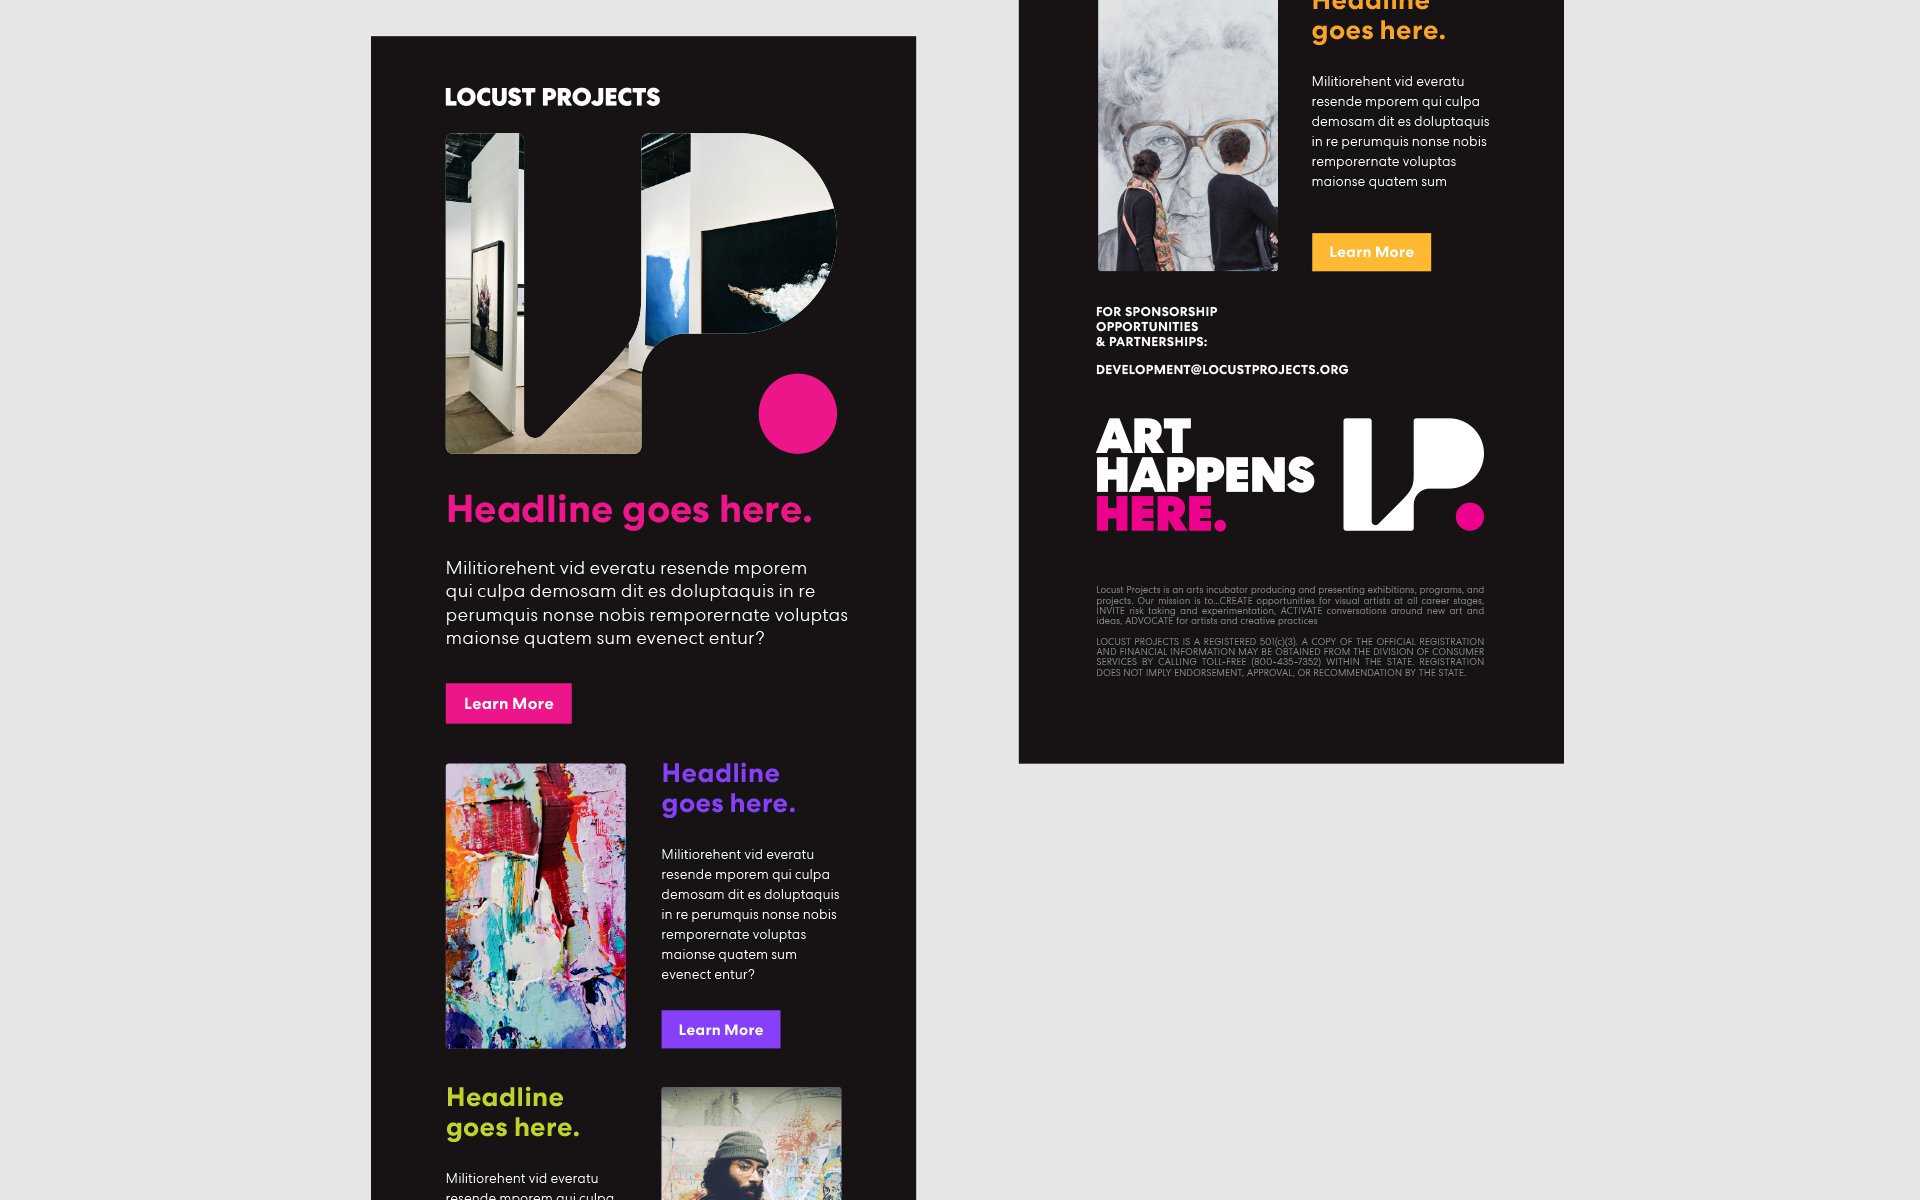 Email Blast Layouts for Locust Projects